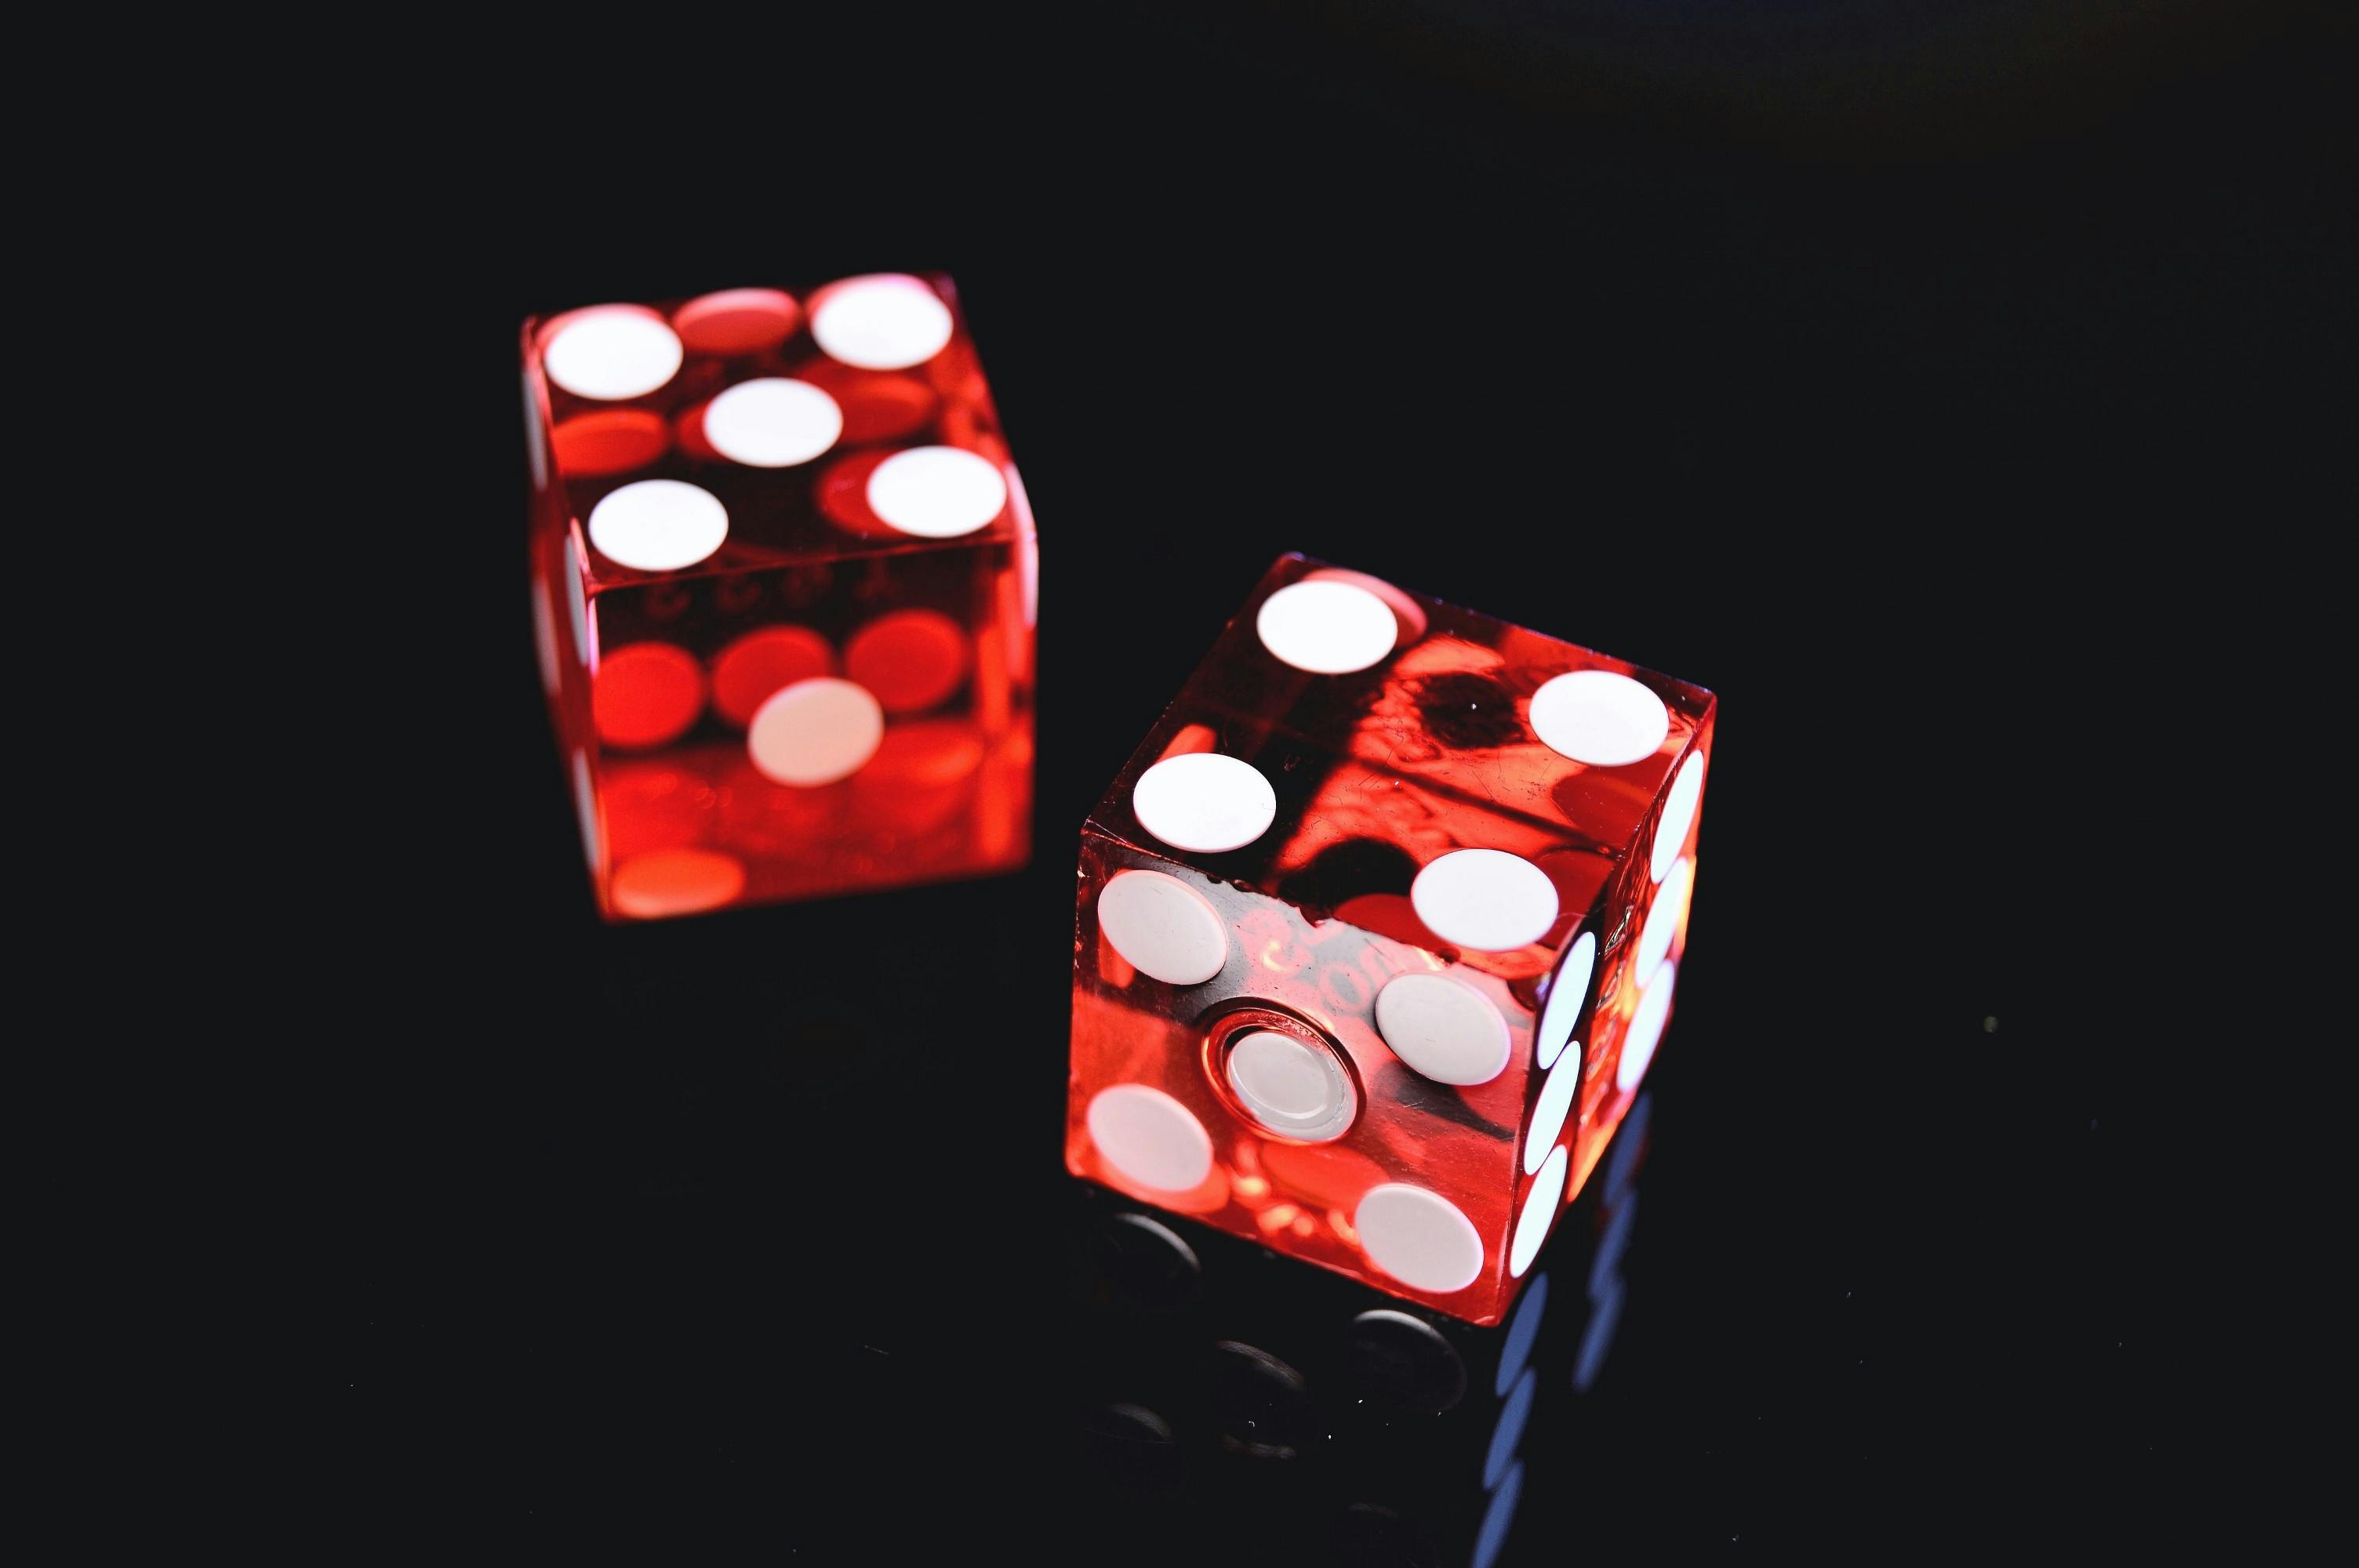 A pair of dice.